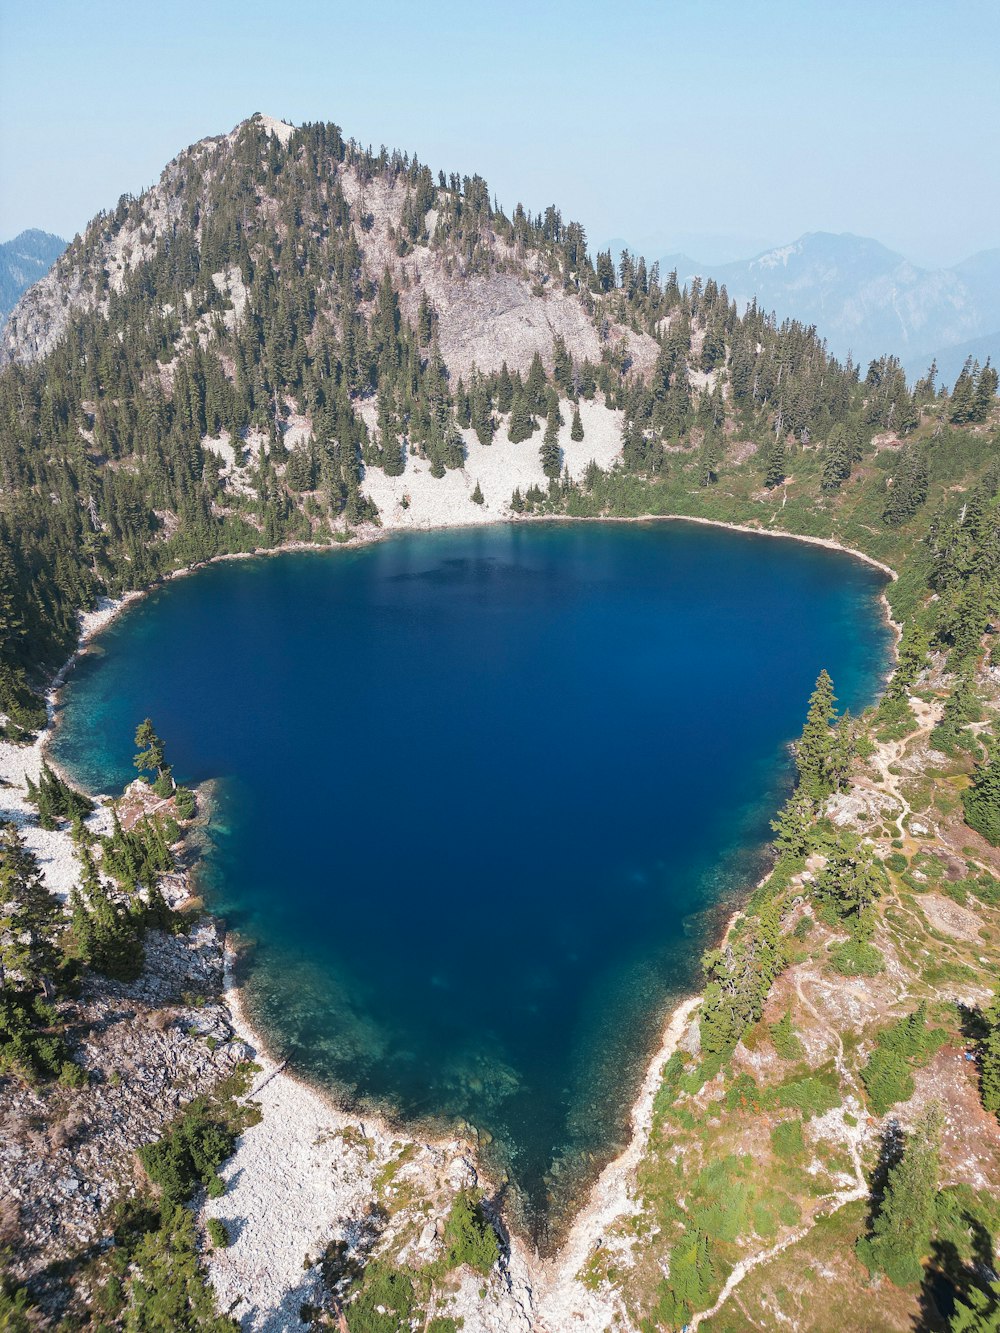 a large blue lake surrounded by mountains and trees